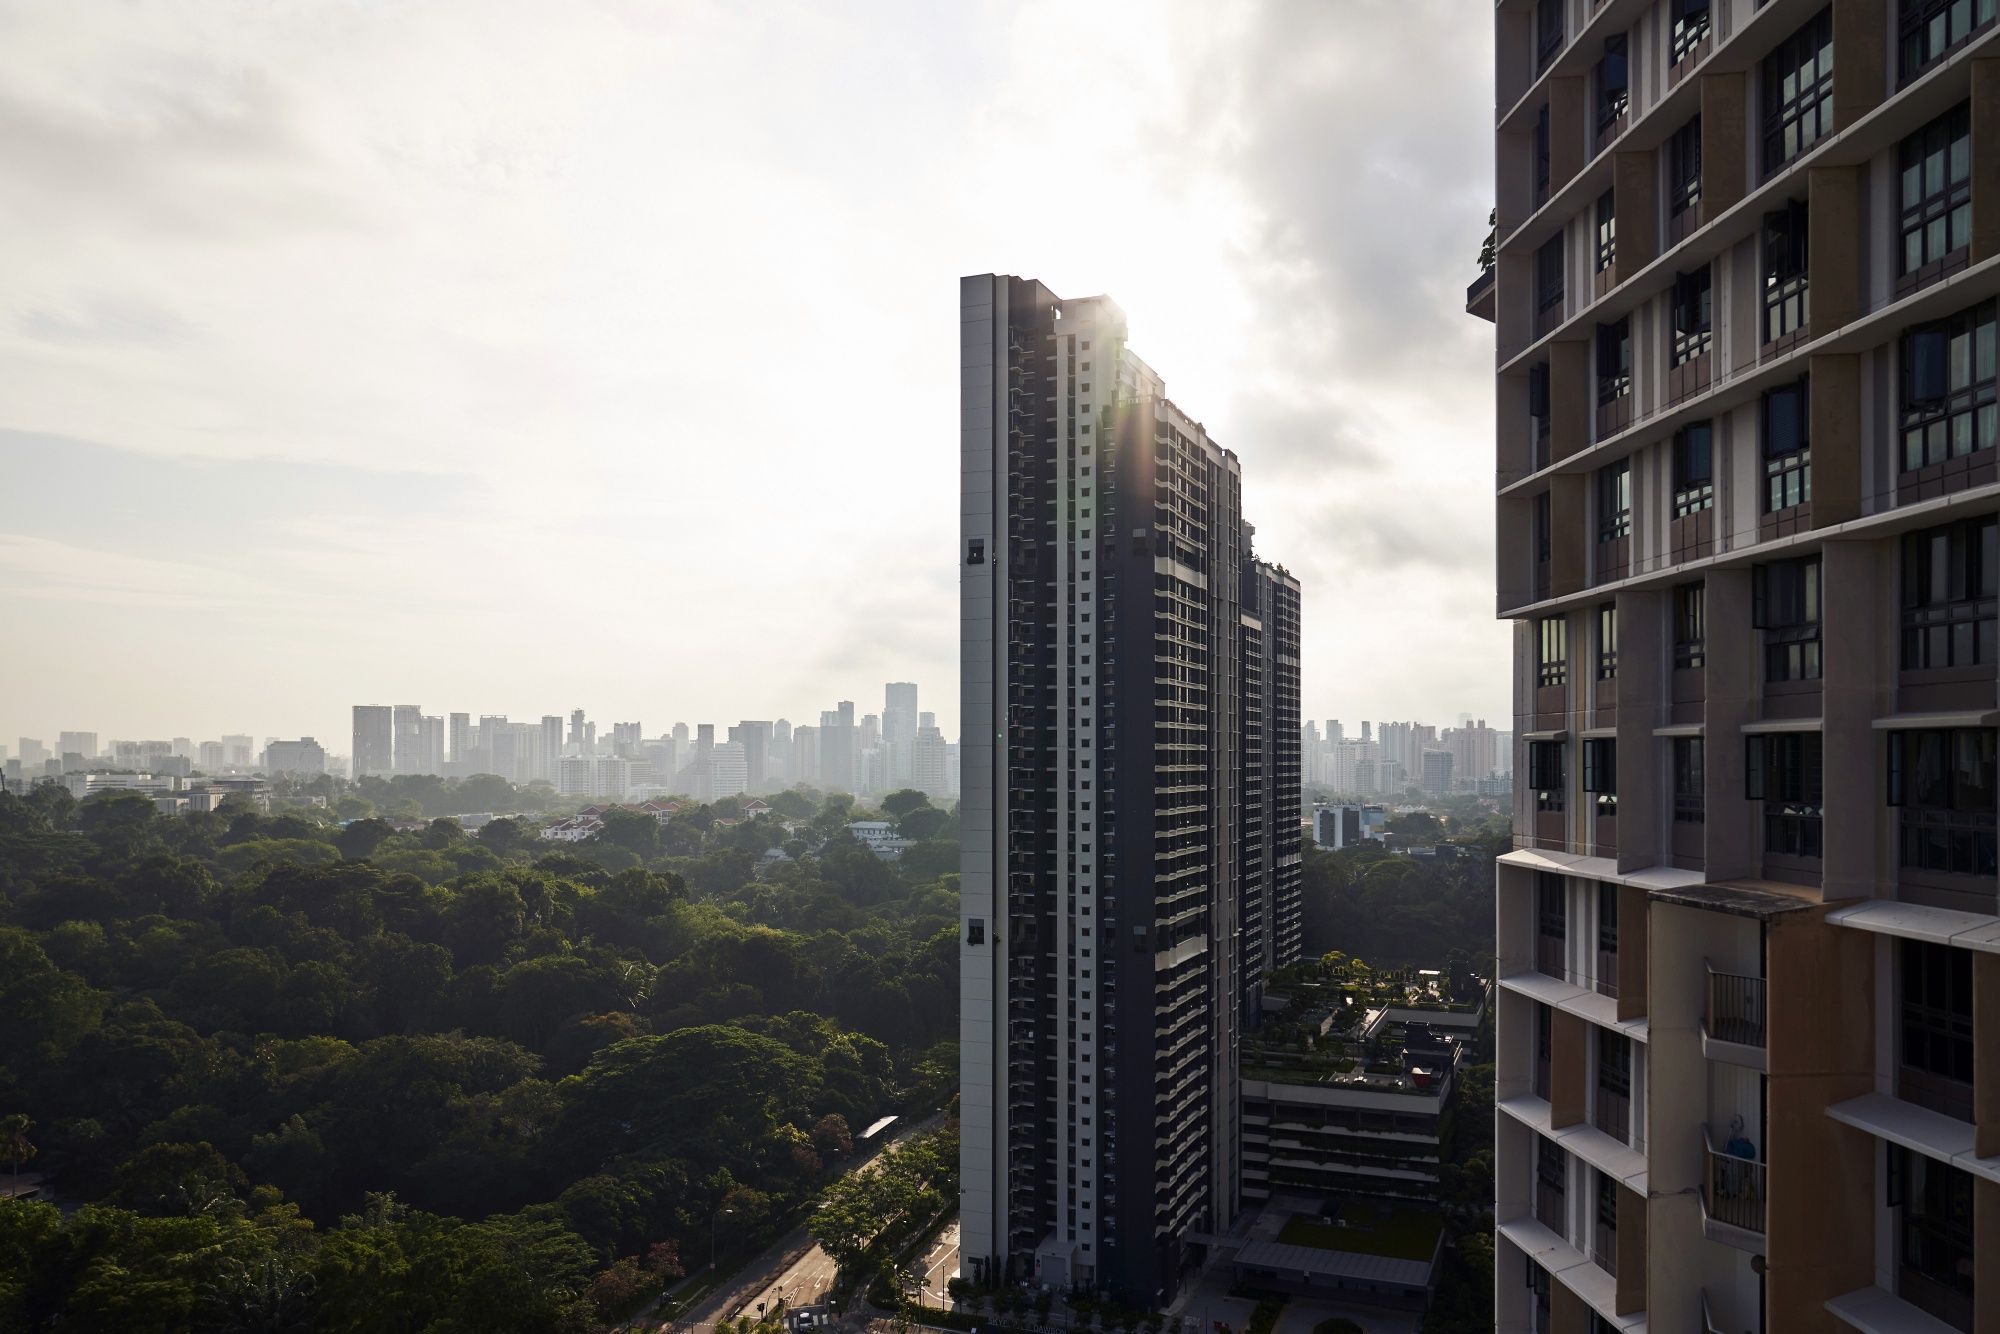 Singapore Property Market Heats Up With Jump in Home Sales